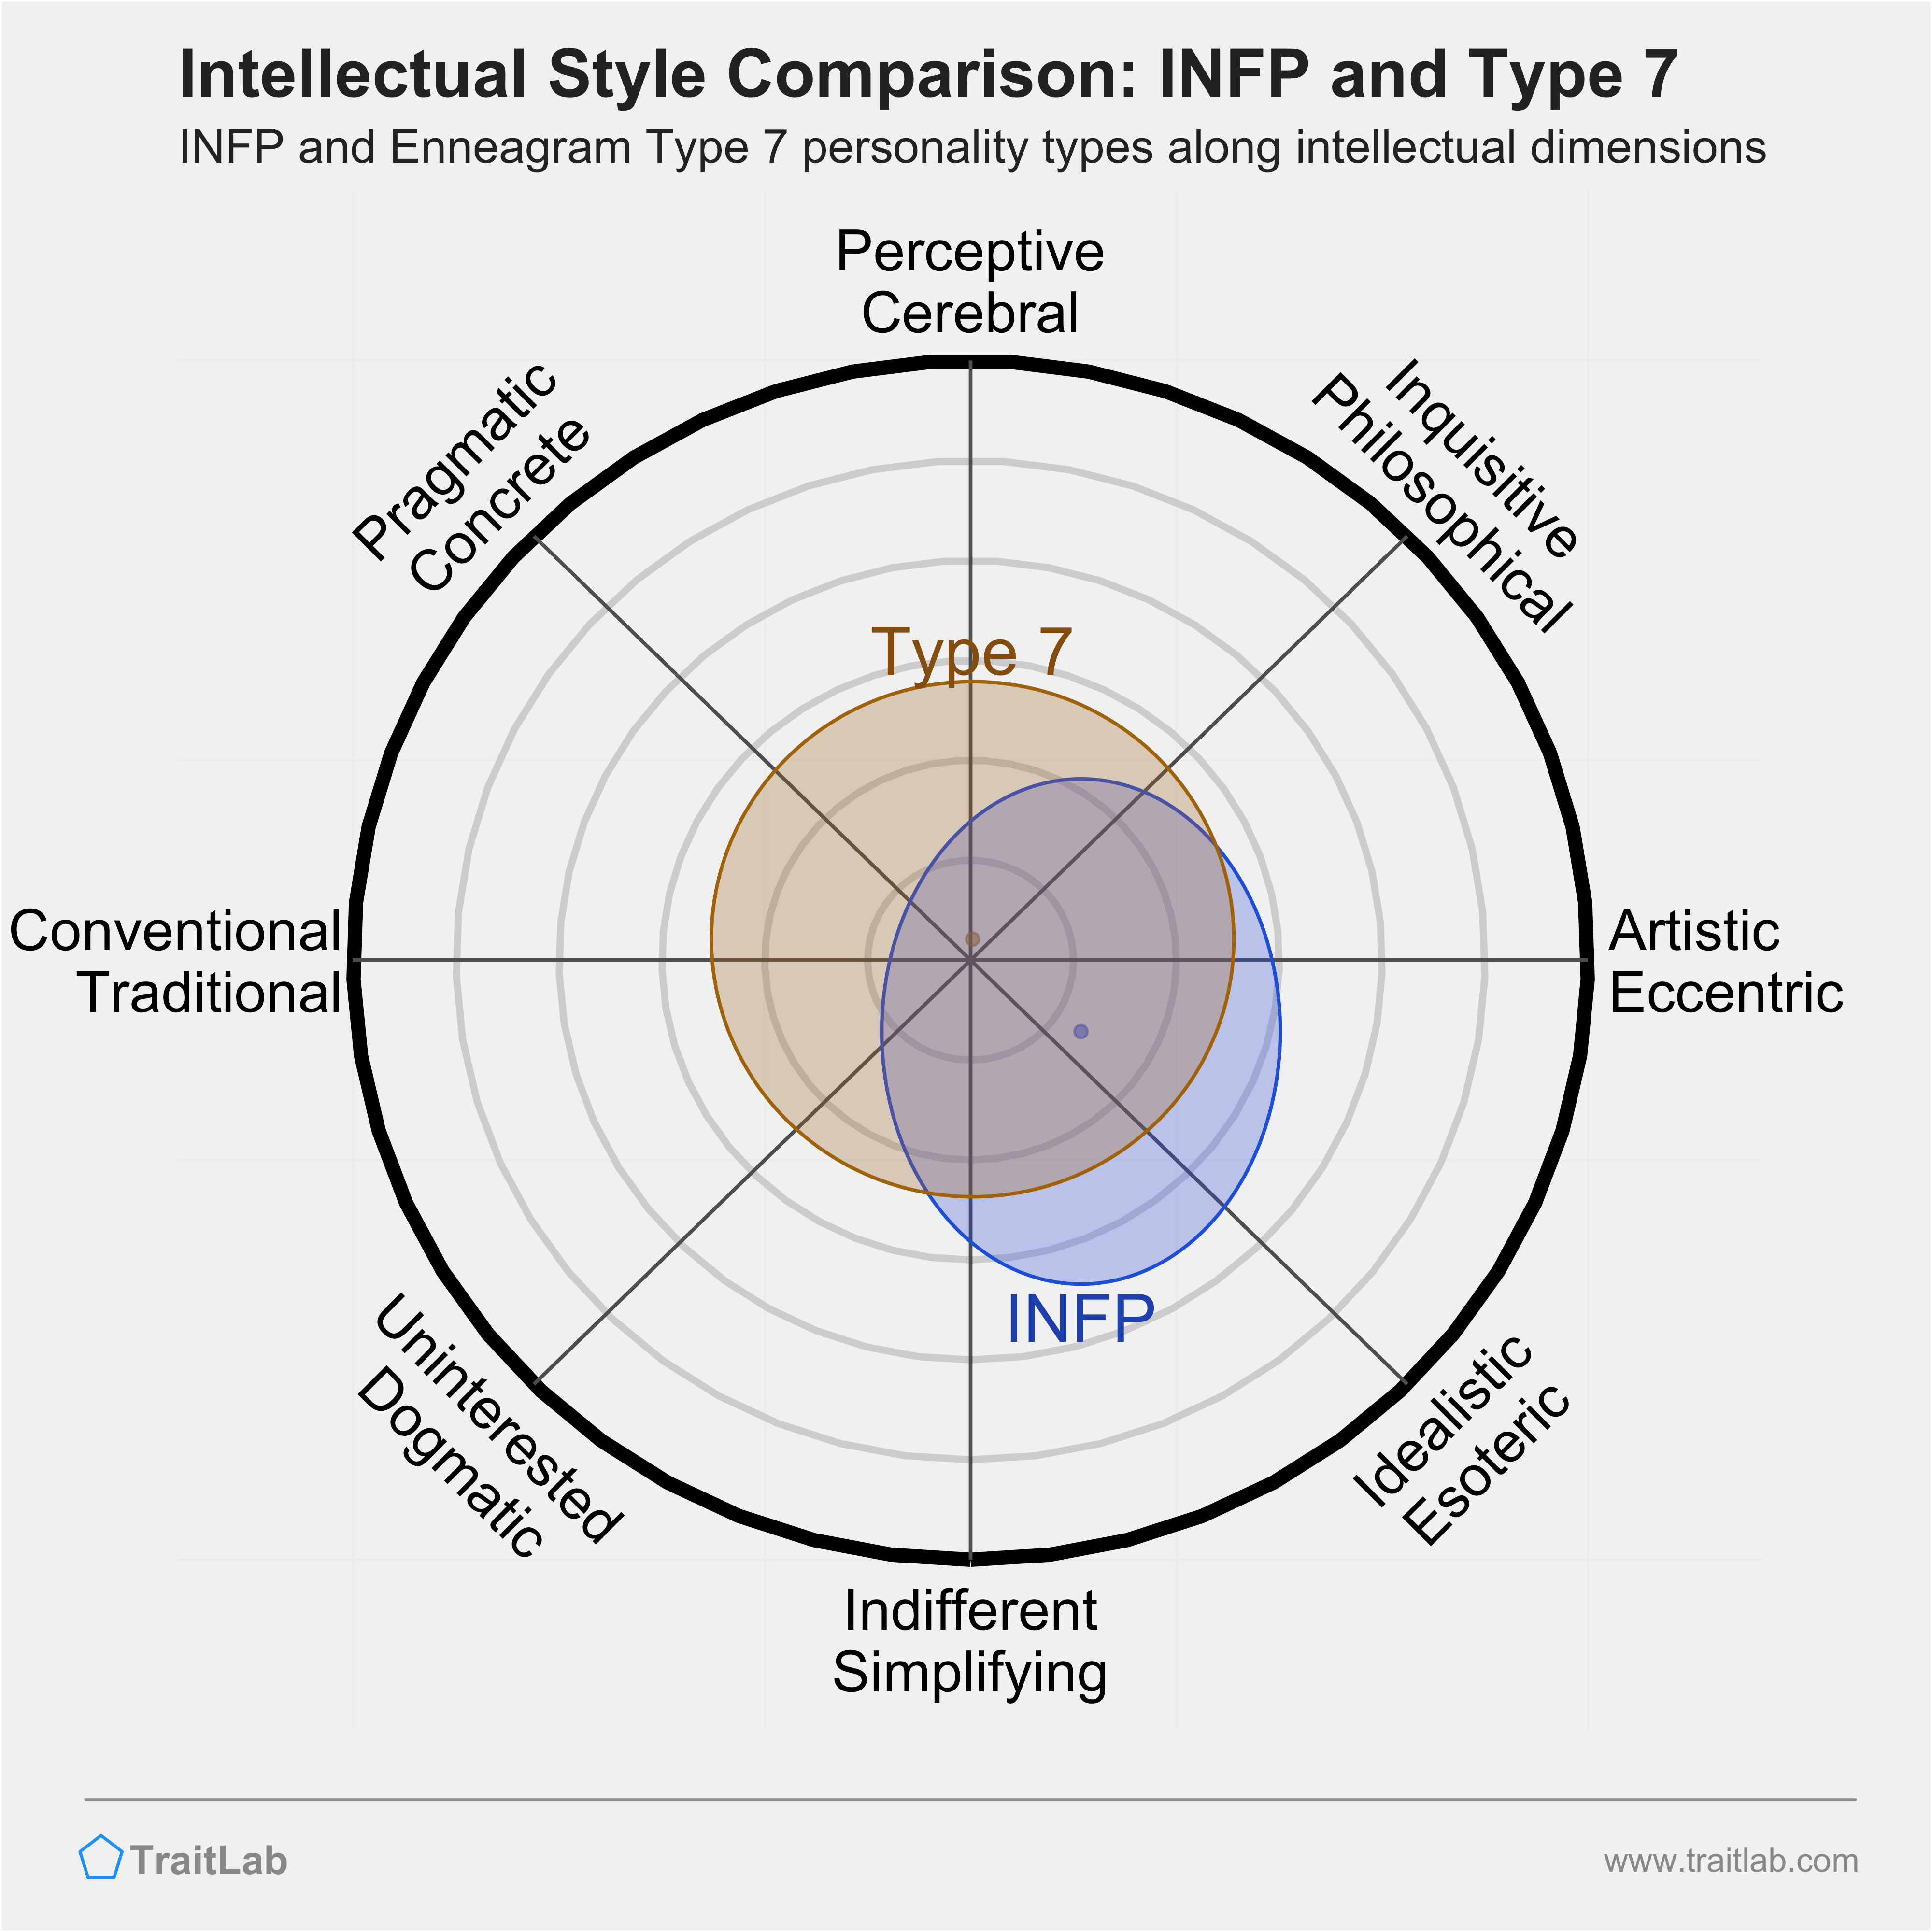 INFP and Type 7 comparison across intellectual dimensions